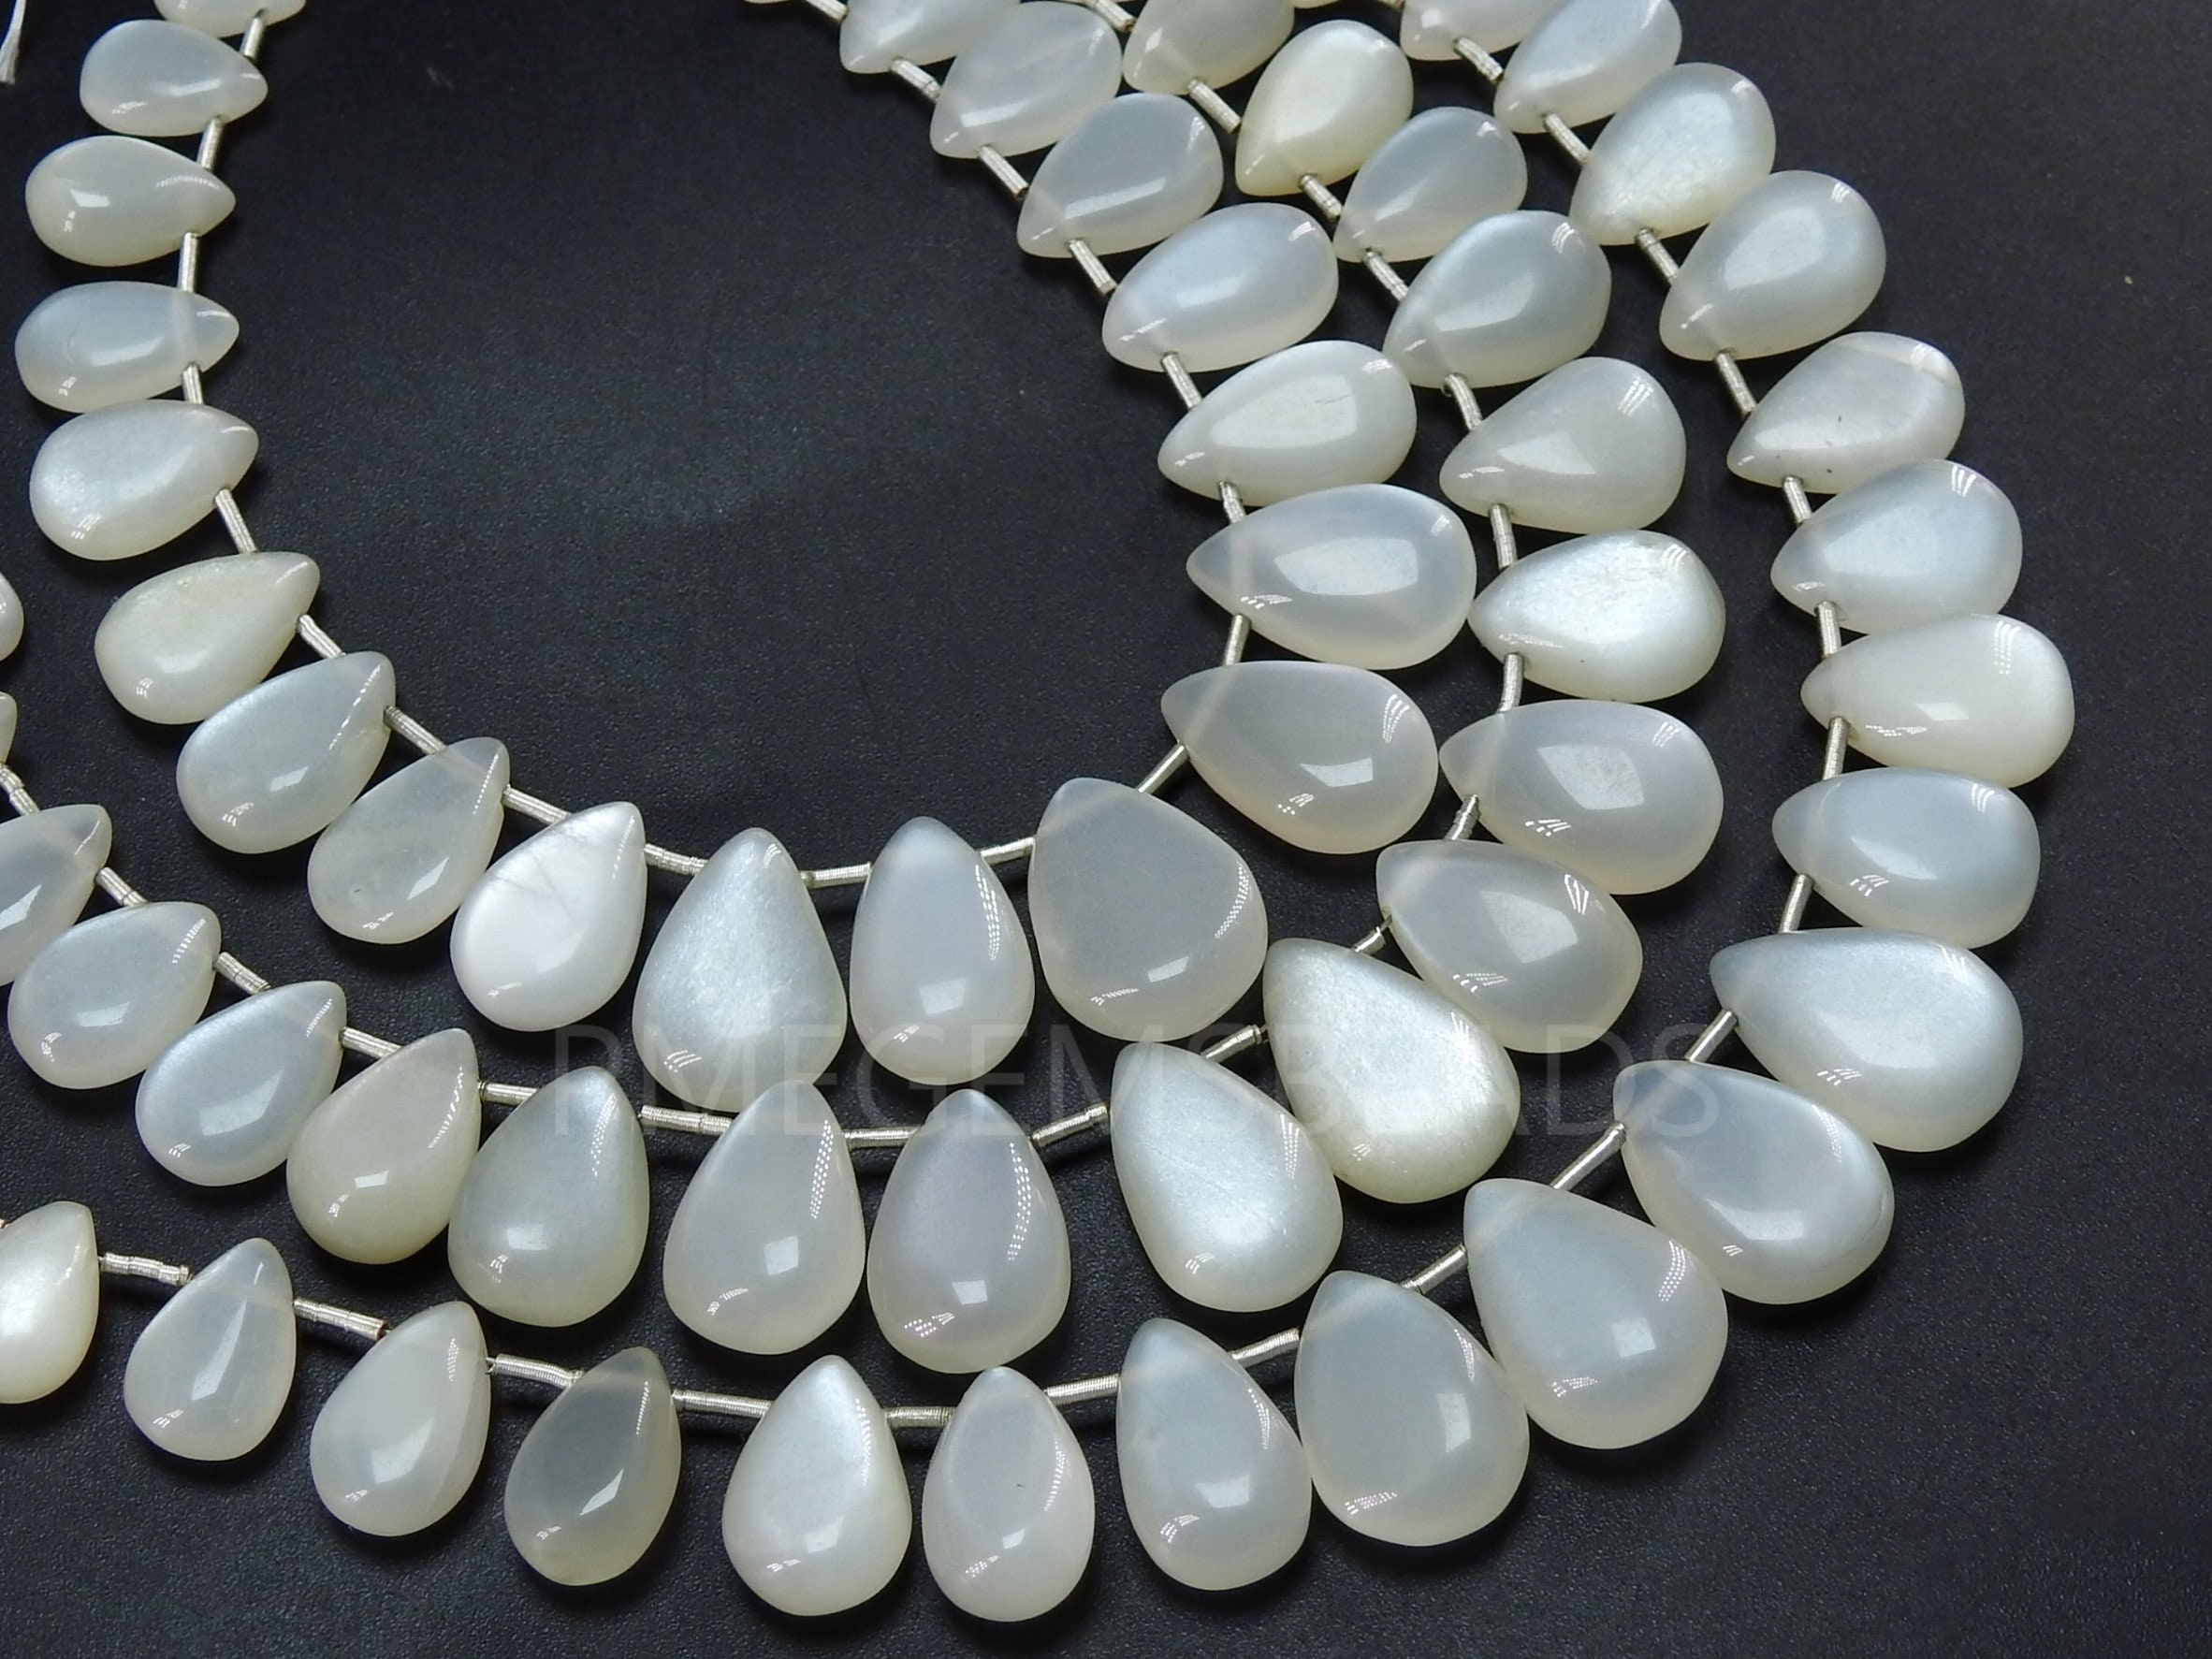 White Moonstone Smooth Teardrop,Drop,Loose Stone,Handmade Bead,For Making Jewelry,Wholesaler,Supplies,7Inchs 15X10To9X6MM Approx,PME-BR2 | Save 33% - Rajasthan Living 11